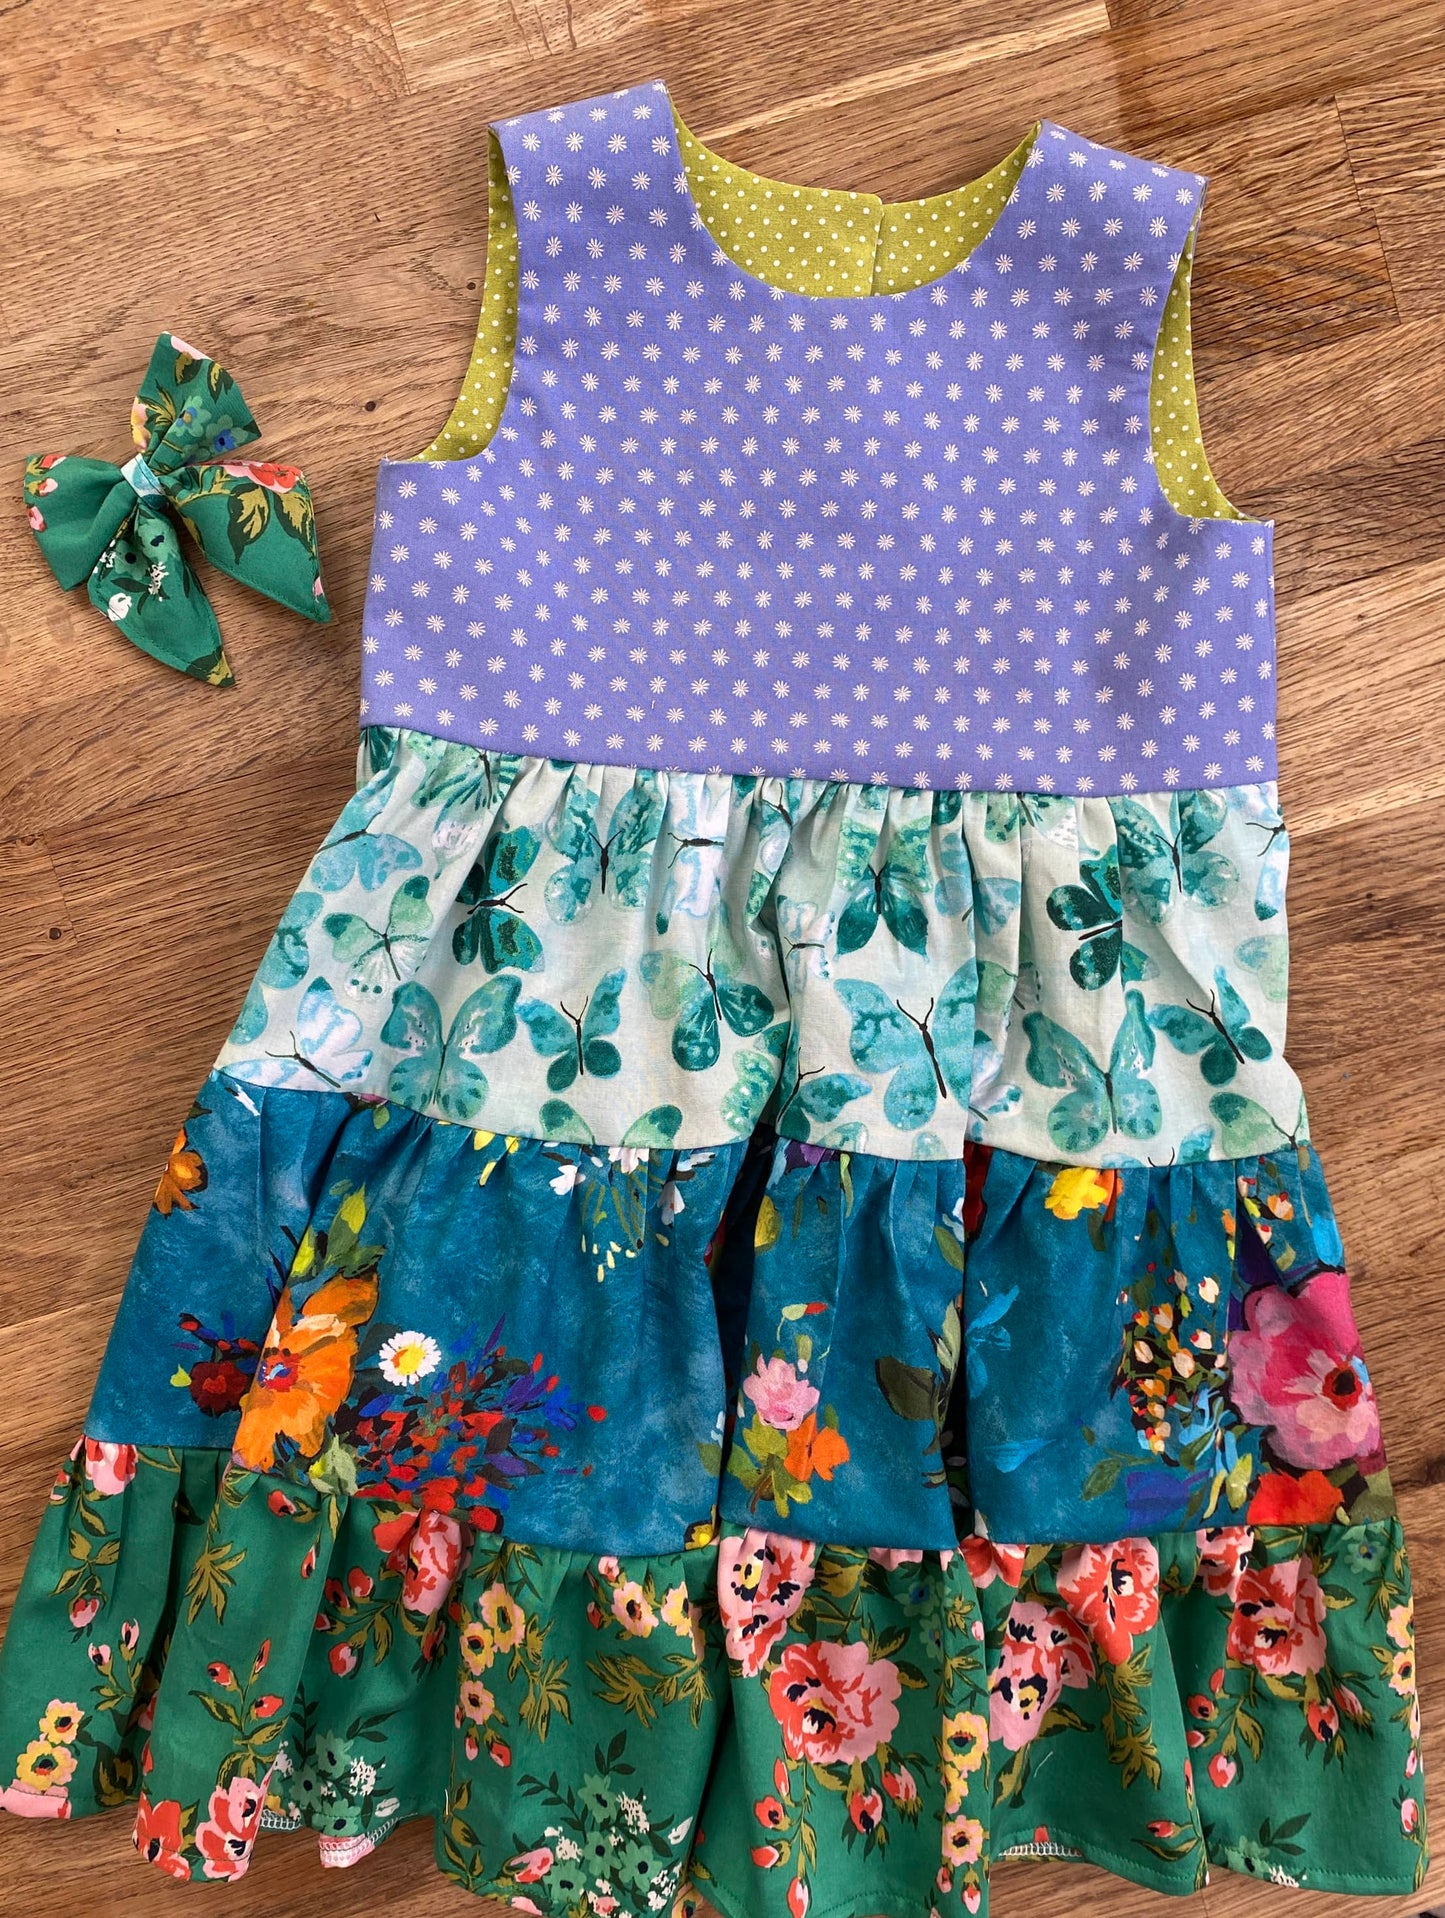 Blue & Green Floral Dress (SAMPLE) Size 4 - Ready to Ship